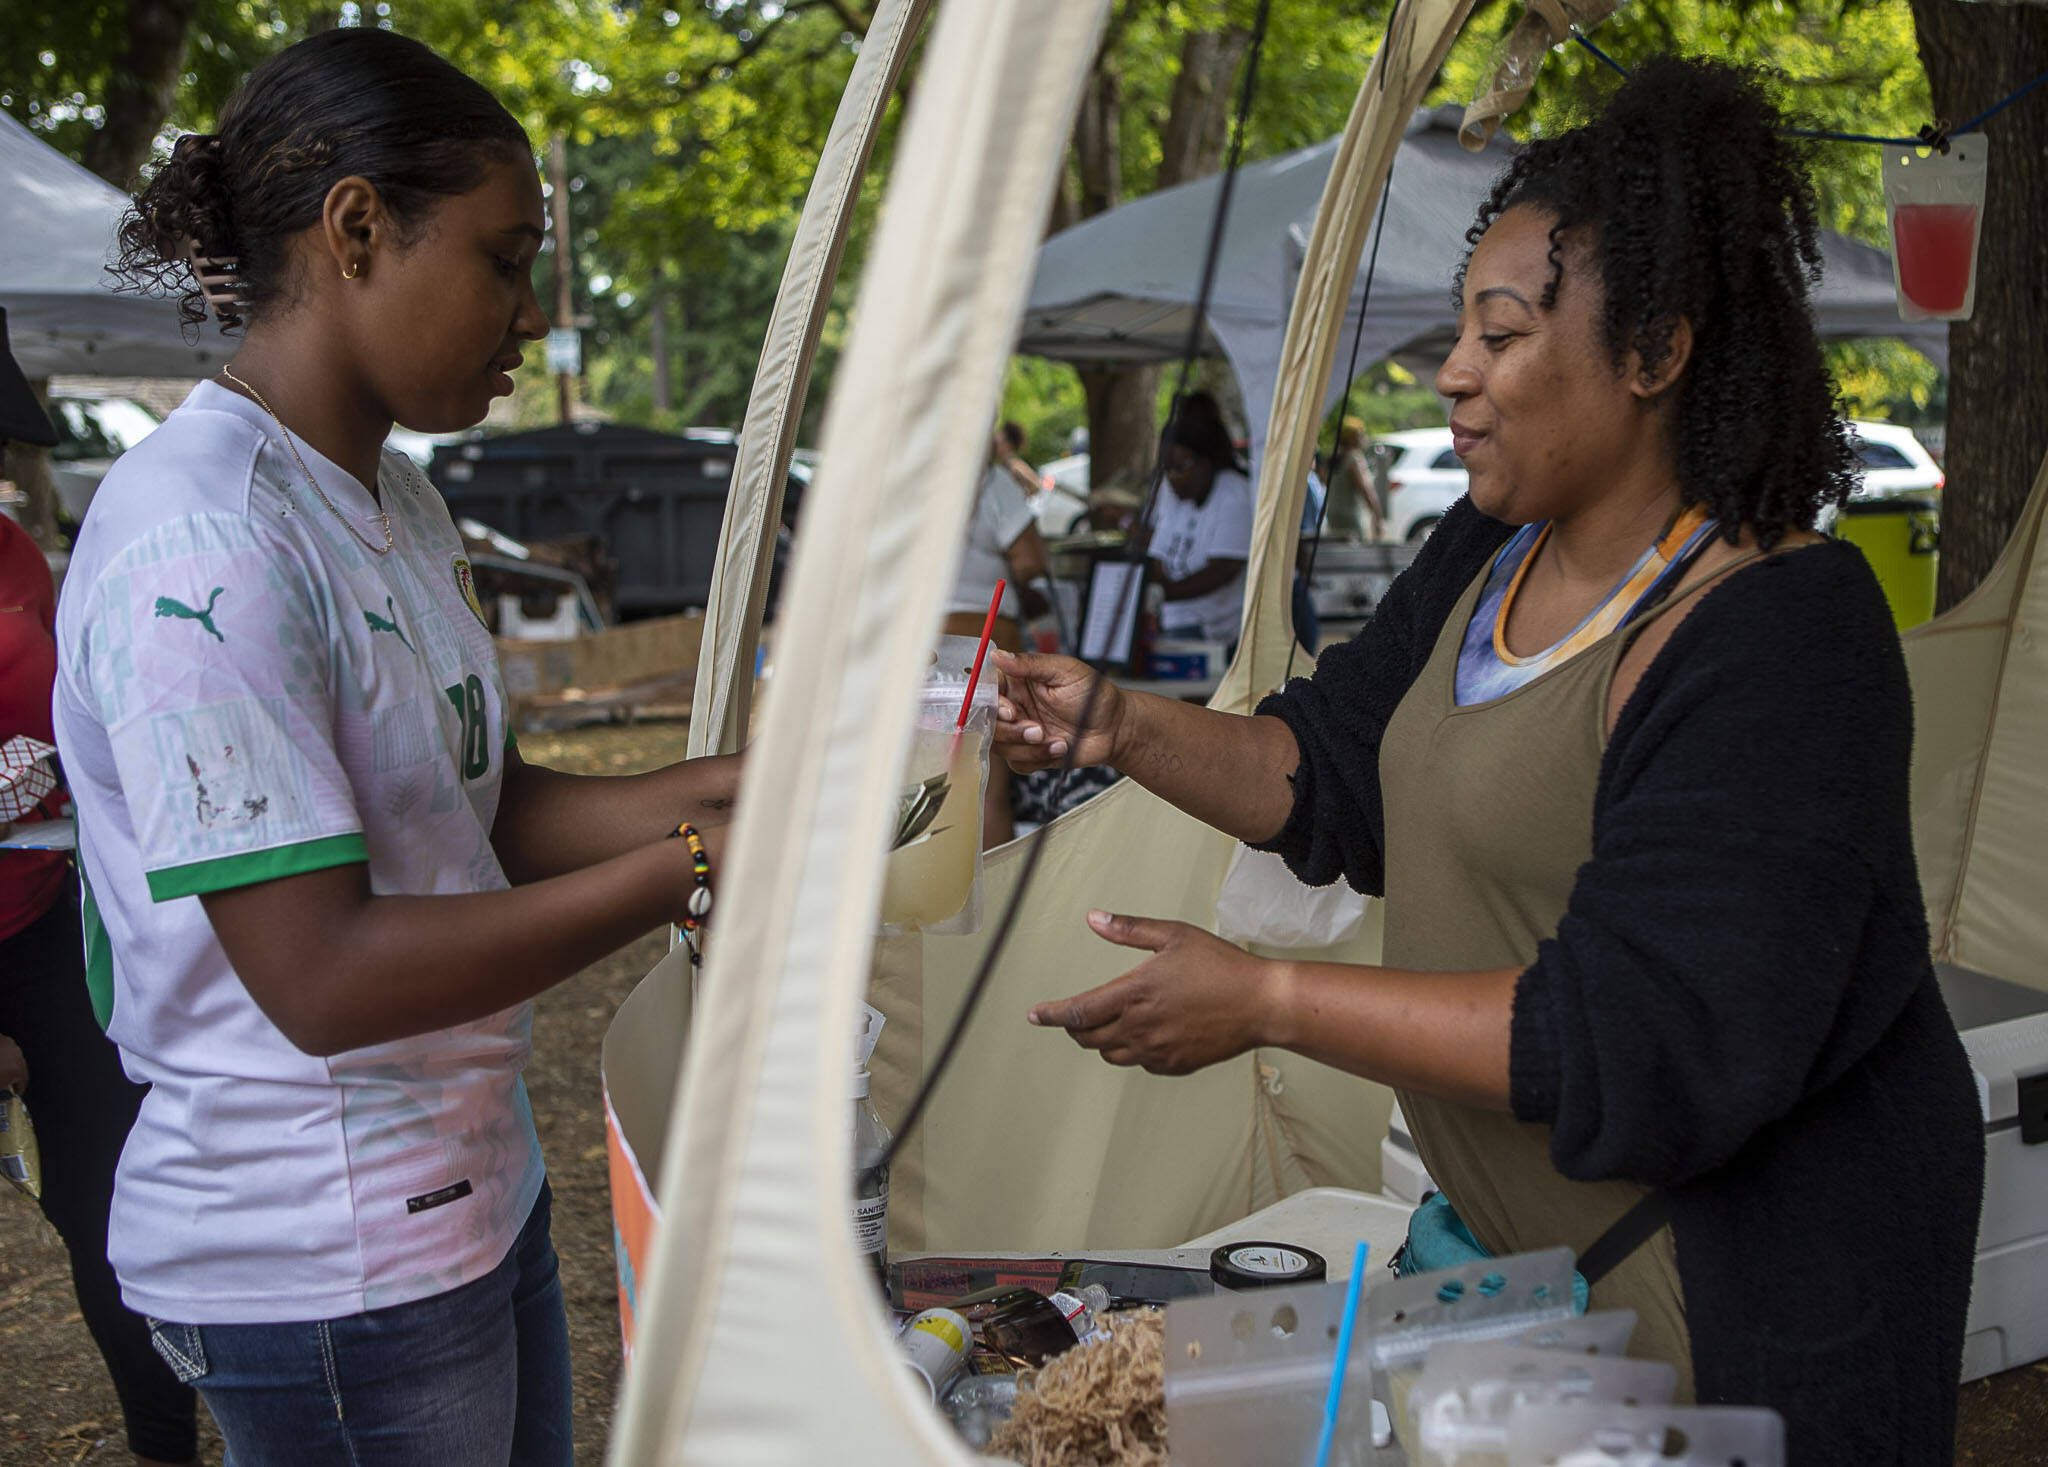 Tea Moss Shop Owner Takiyah Miller, right, serves a drink to a customer during the Nubian Jam at Forest Park in Everett, Washington on Saturday, July 29, 2023. (Annie Barker / The Herald)